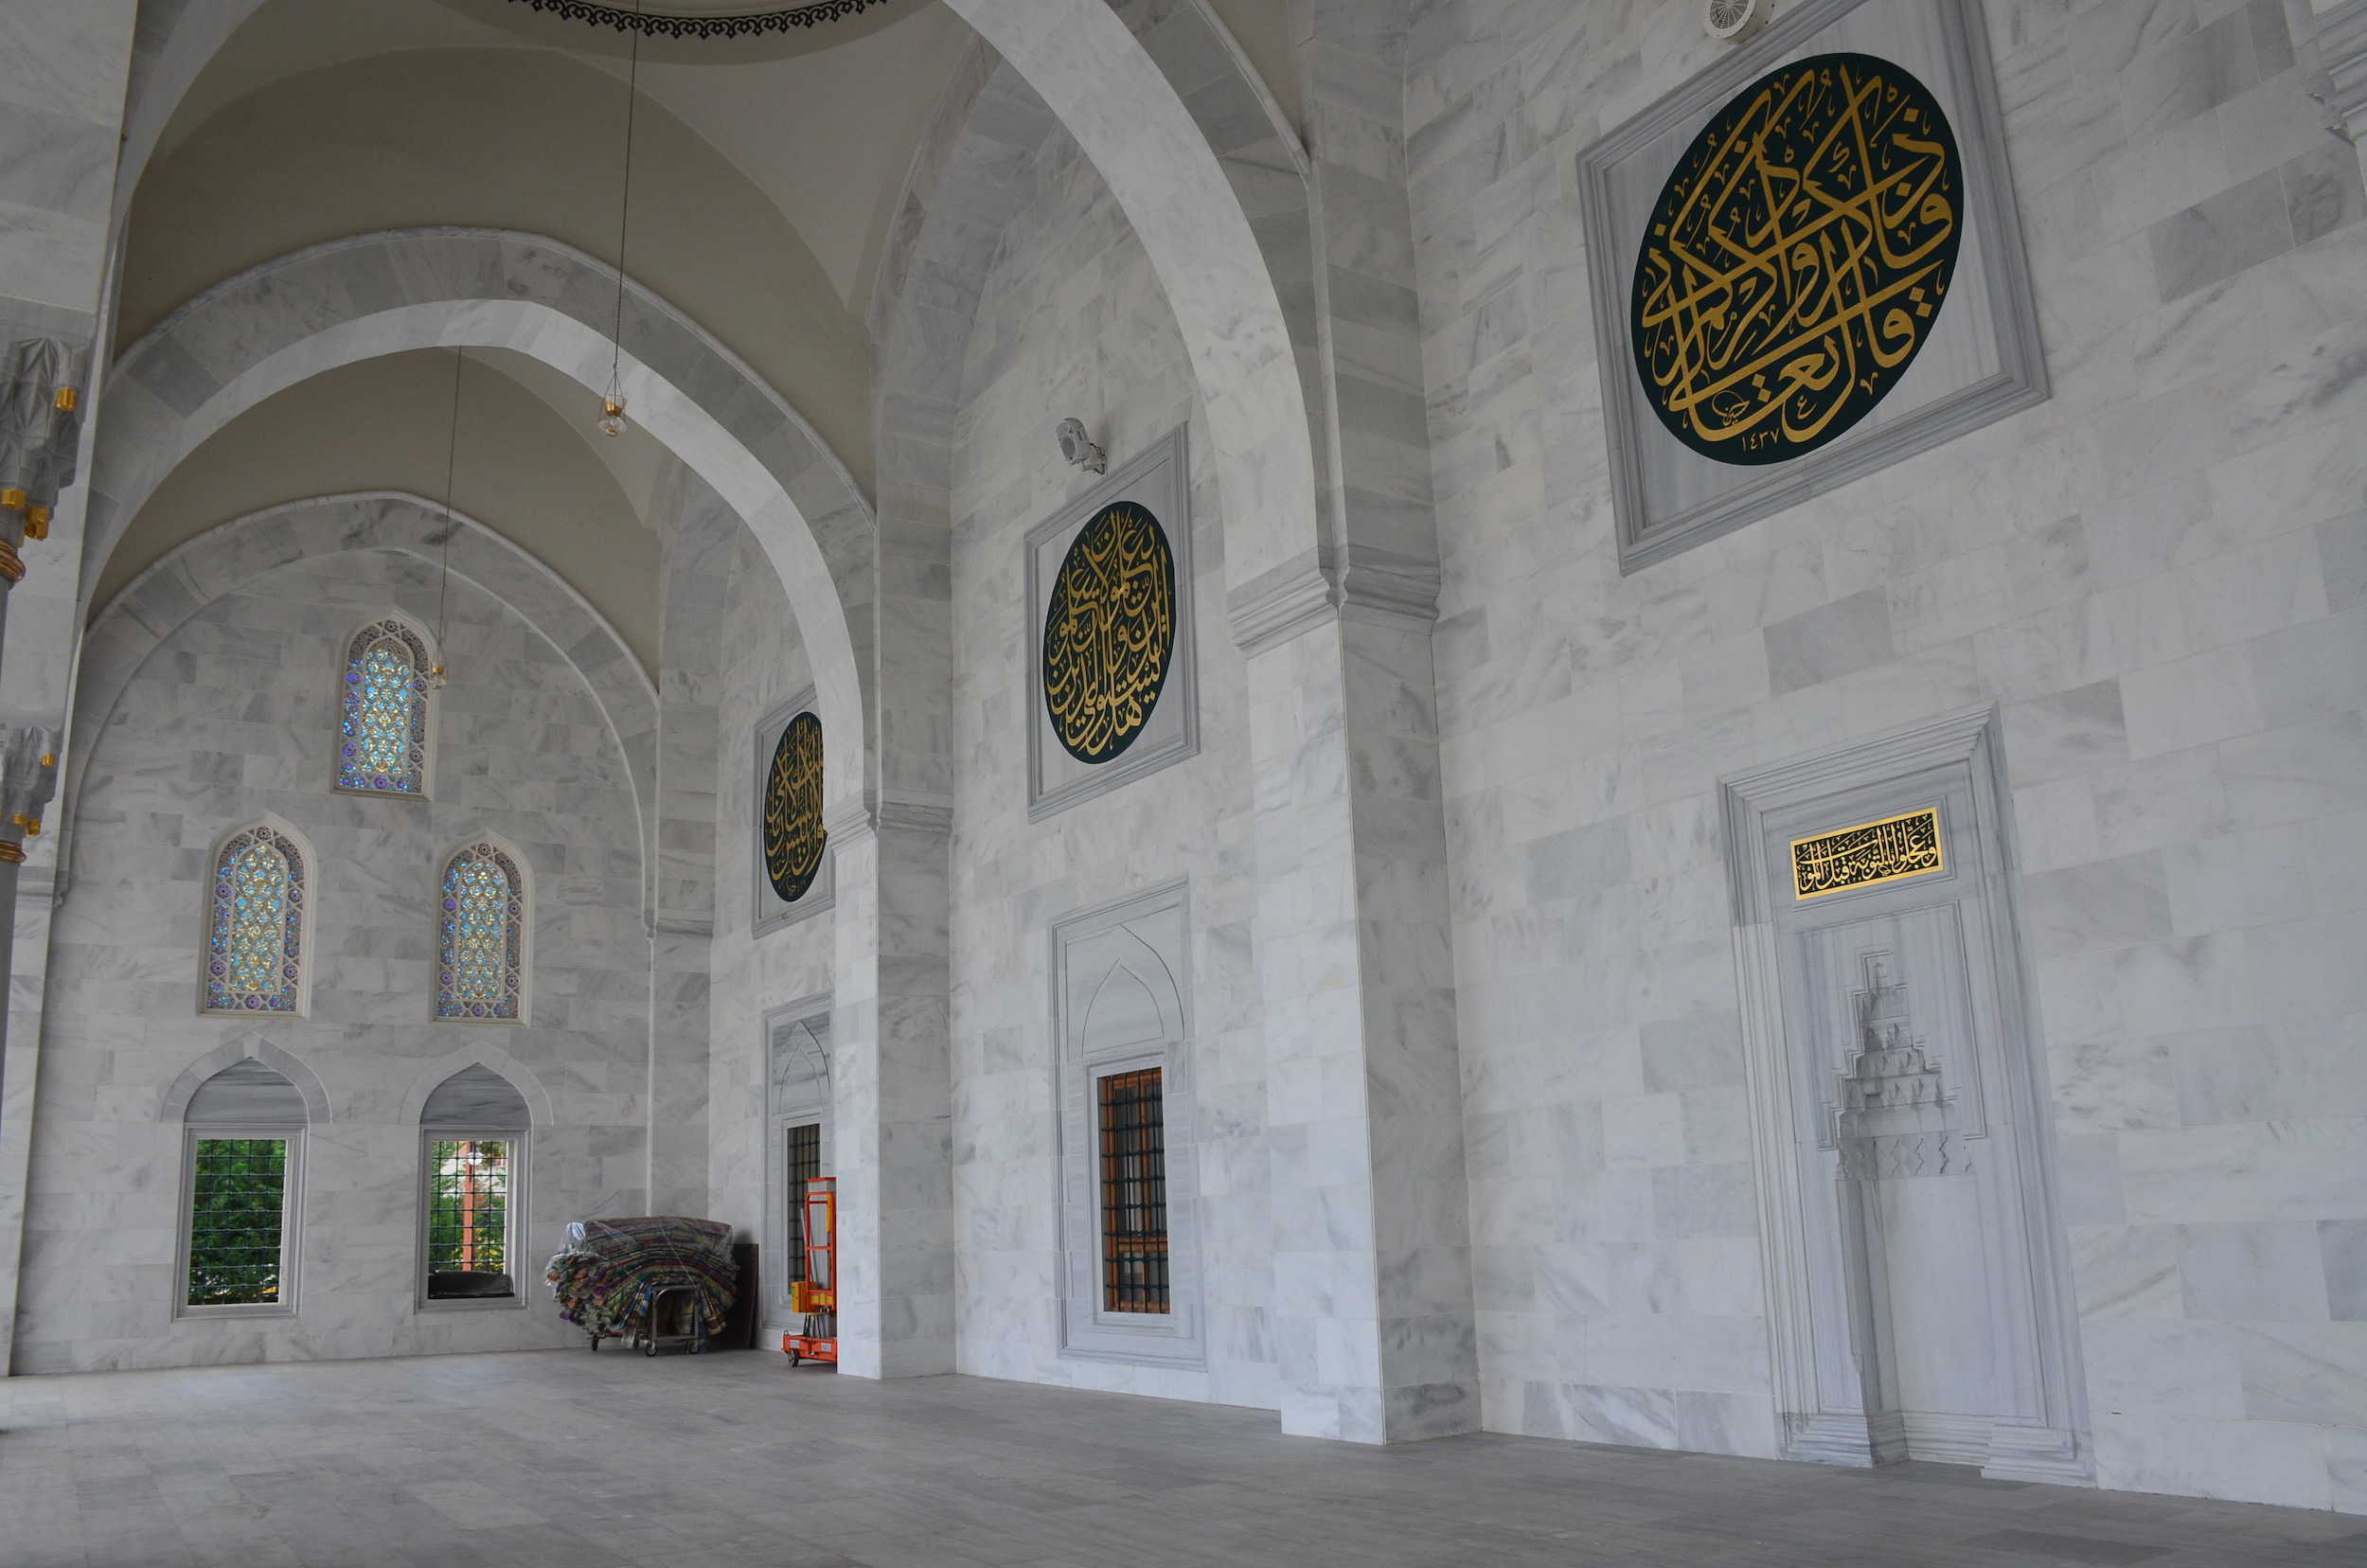 Portico of the Melike Hatun Mosque